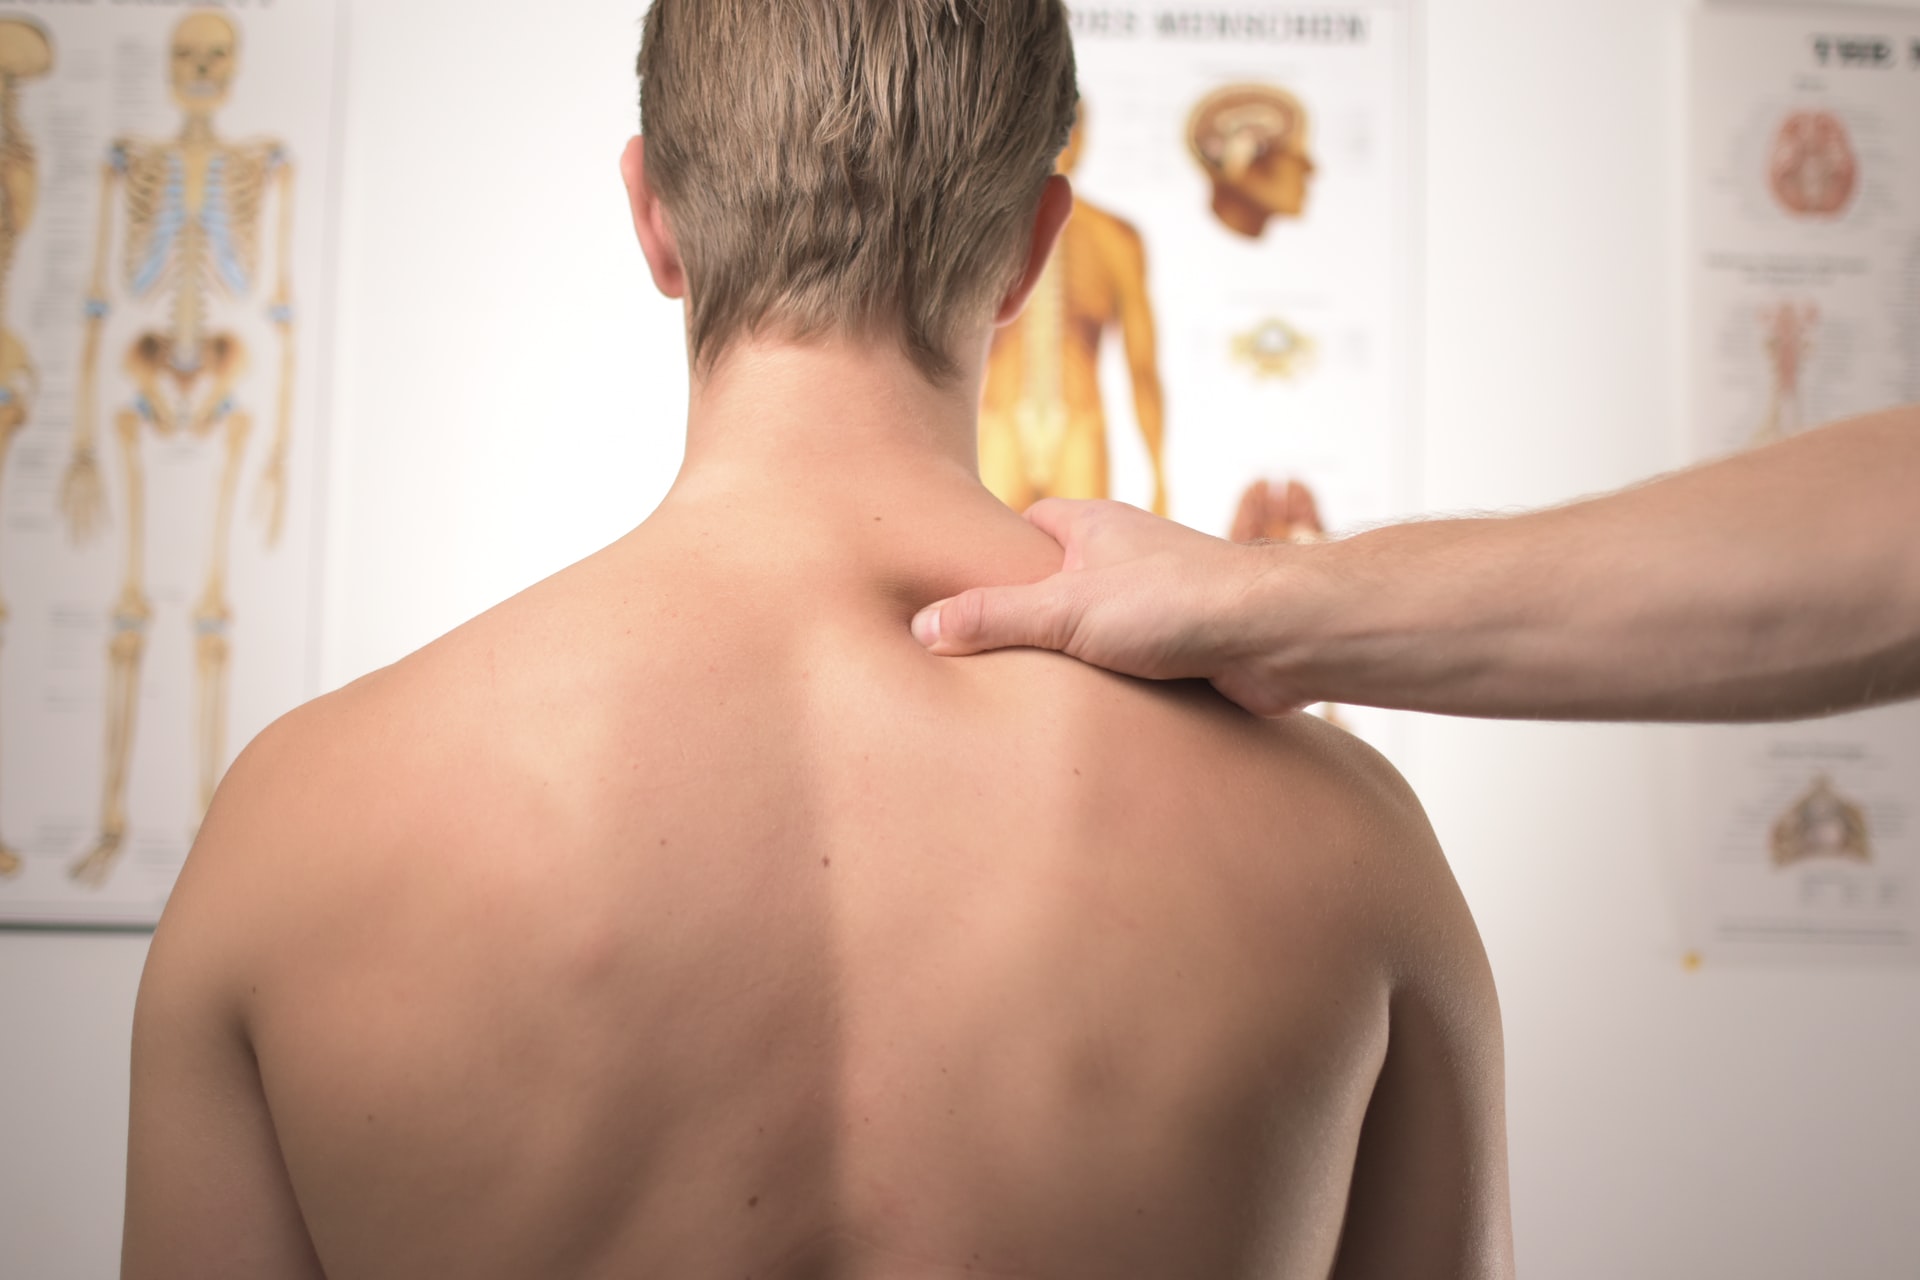 Are you experiencing joint pain, back pain, soft tissue or sports injury? Then you should consider visiting a chiropractic treatment office such as the Elite Sports and Spine Chiropractic. This one goes beyond the traditional chiropractic of focusing on the spine.